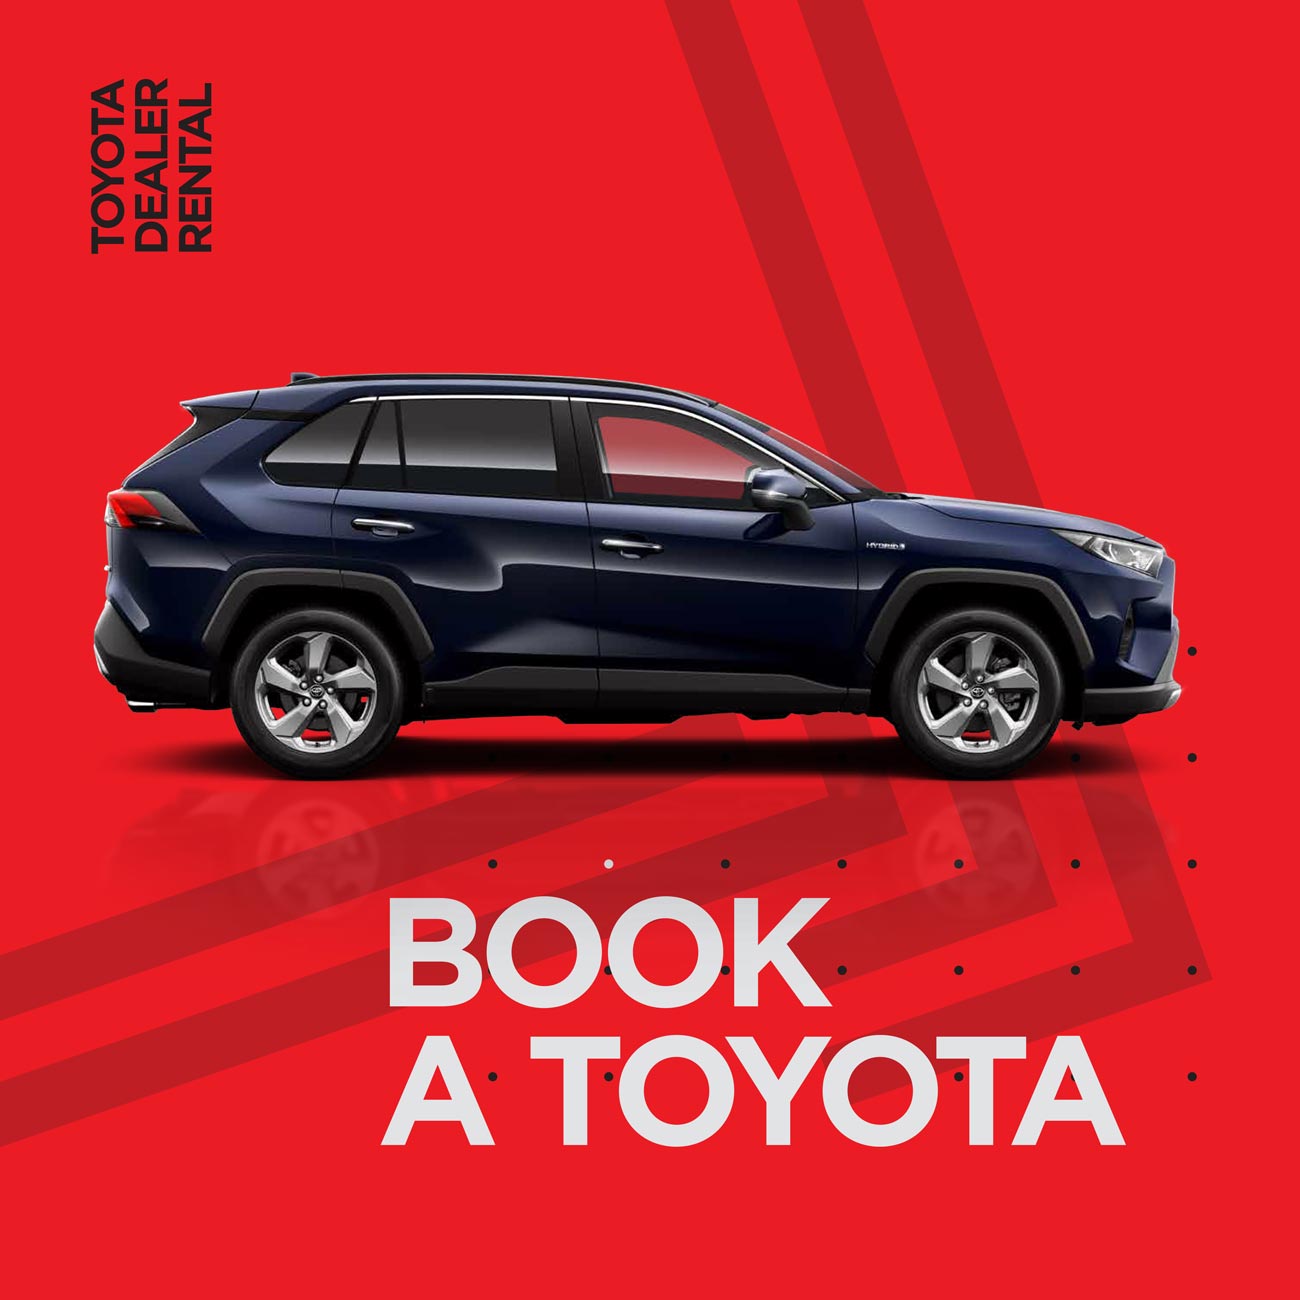 Example branded social media post for Toyota Dealer Rental, displaying black car and "Book a Toyota" text